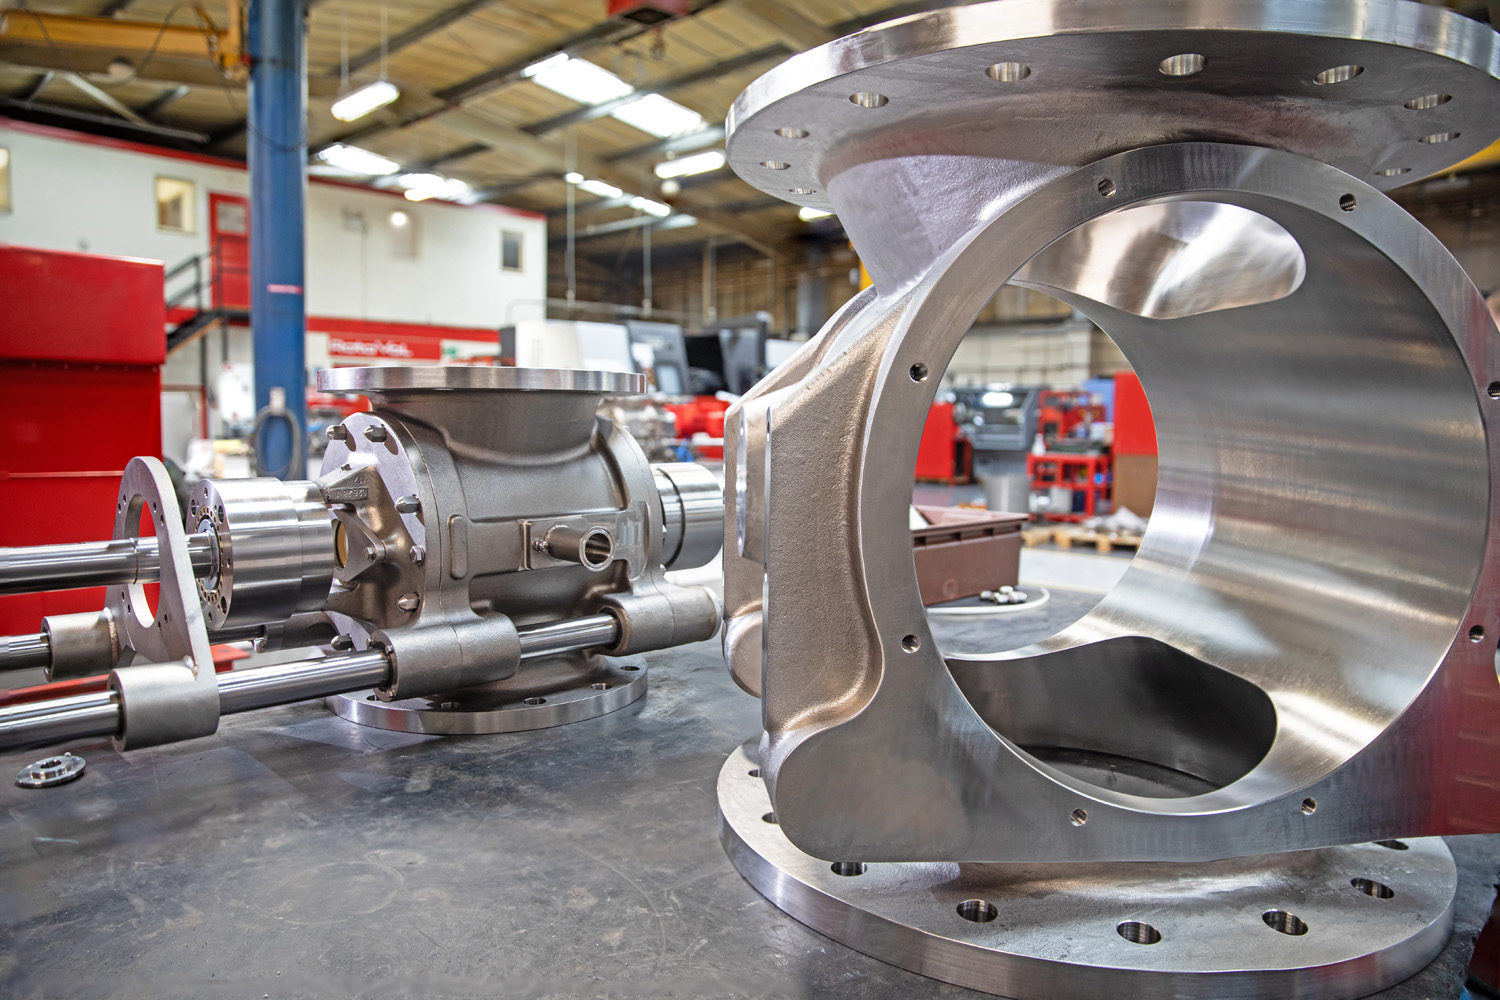 Rotary valve production at Gericke Rotaval Ltd. in the UK